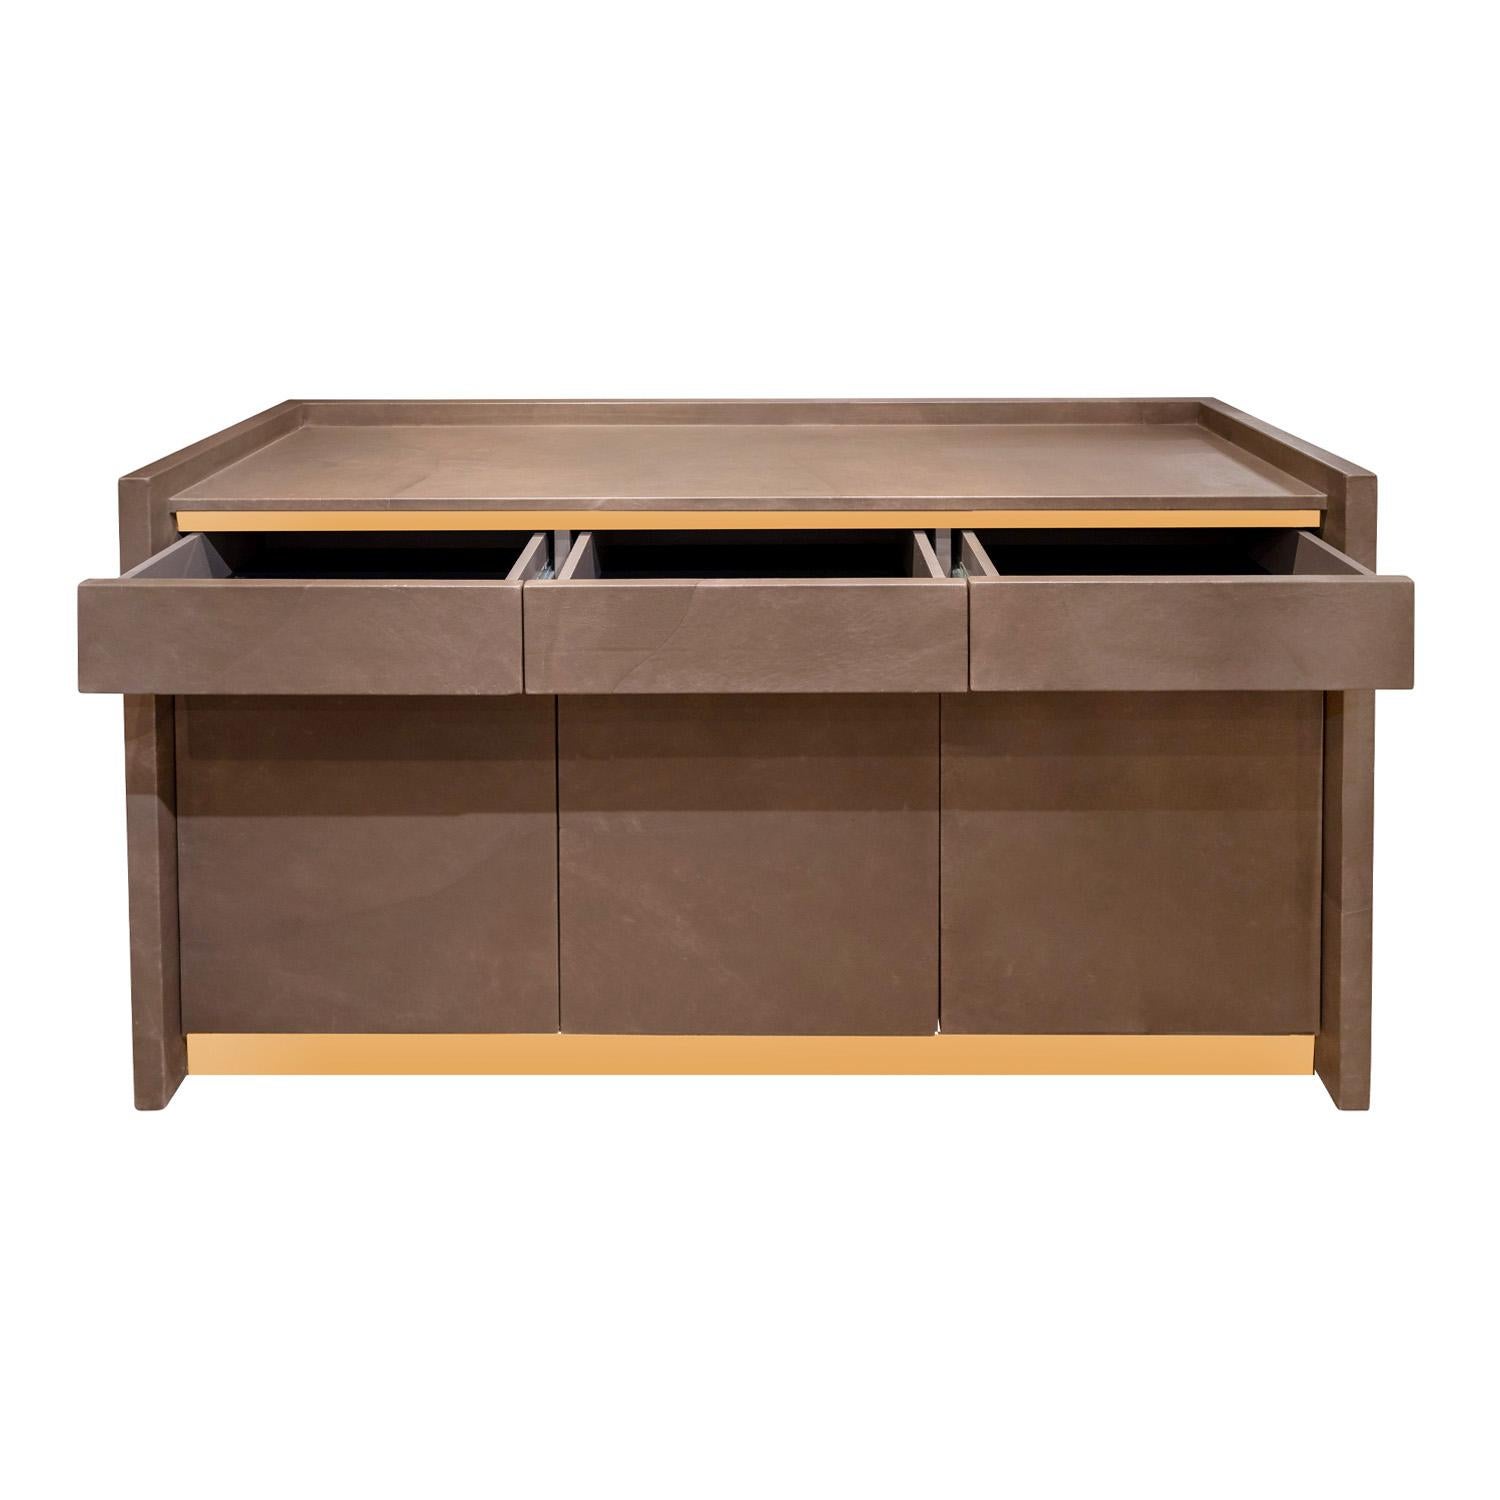 Hand-Crafted Karl Springer Rare Credenza in Taupe Leather and Brass 1985 'Signed and Dated' For Sale